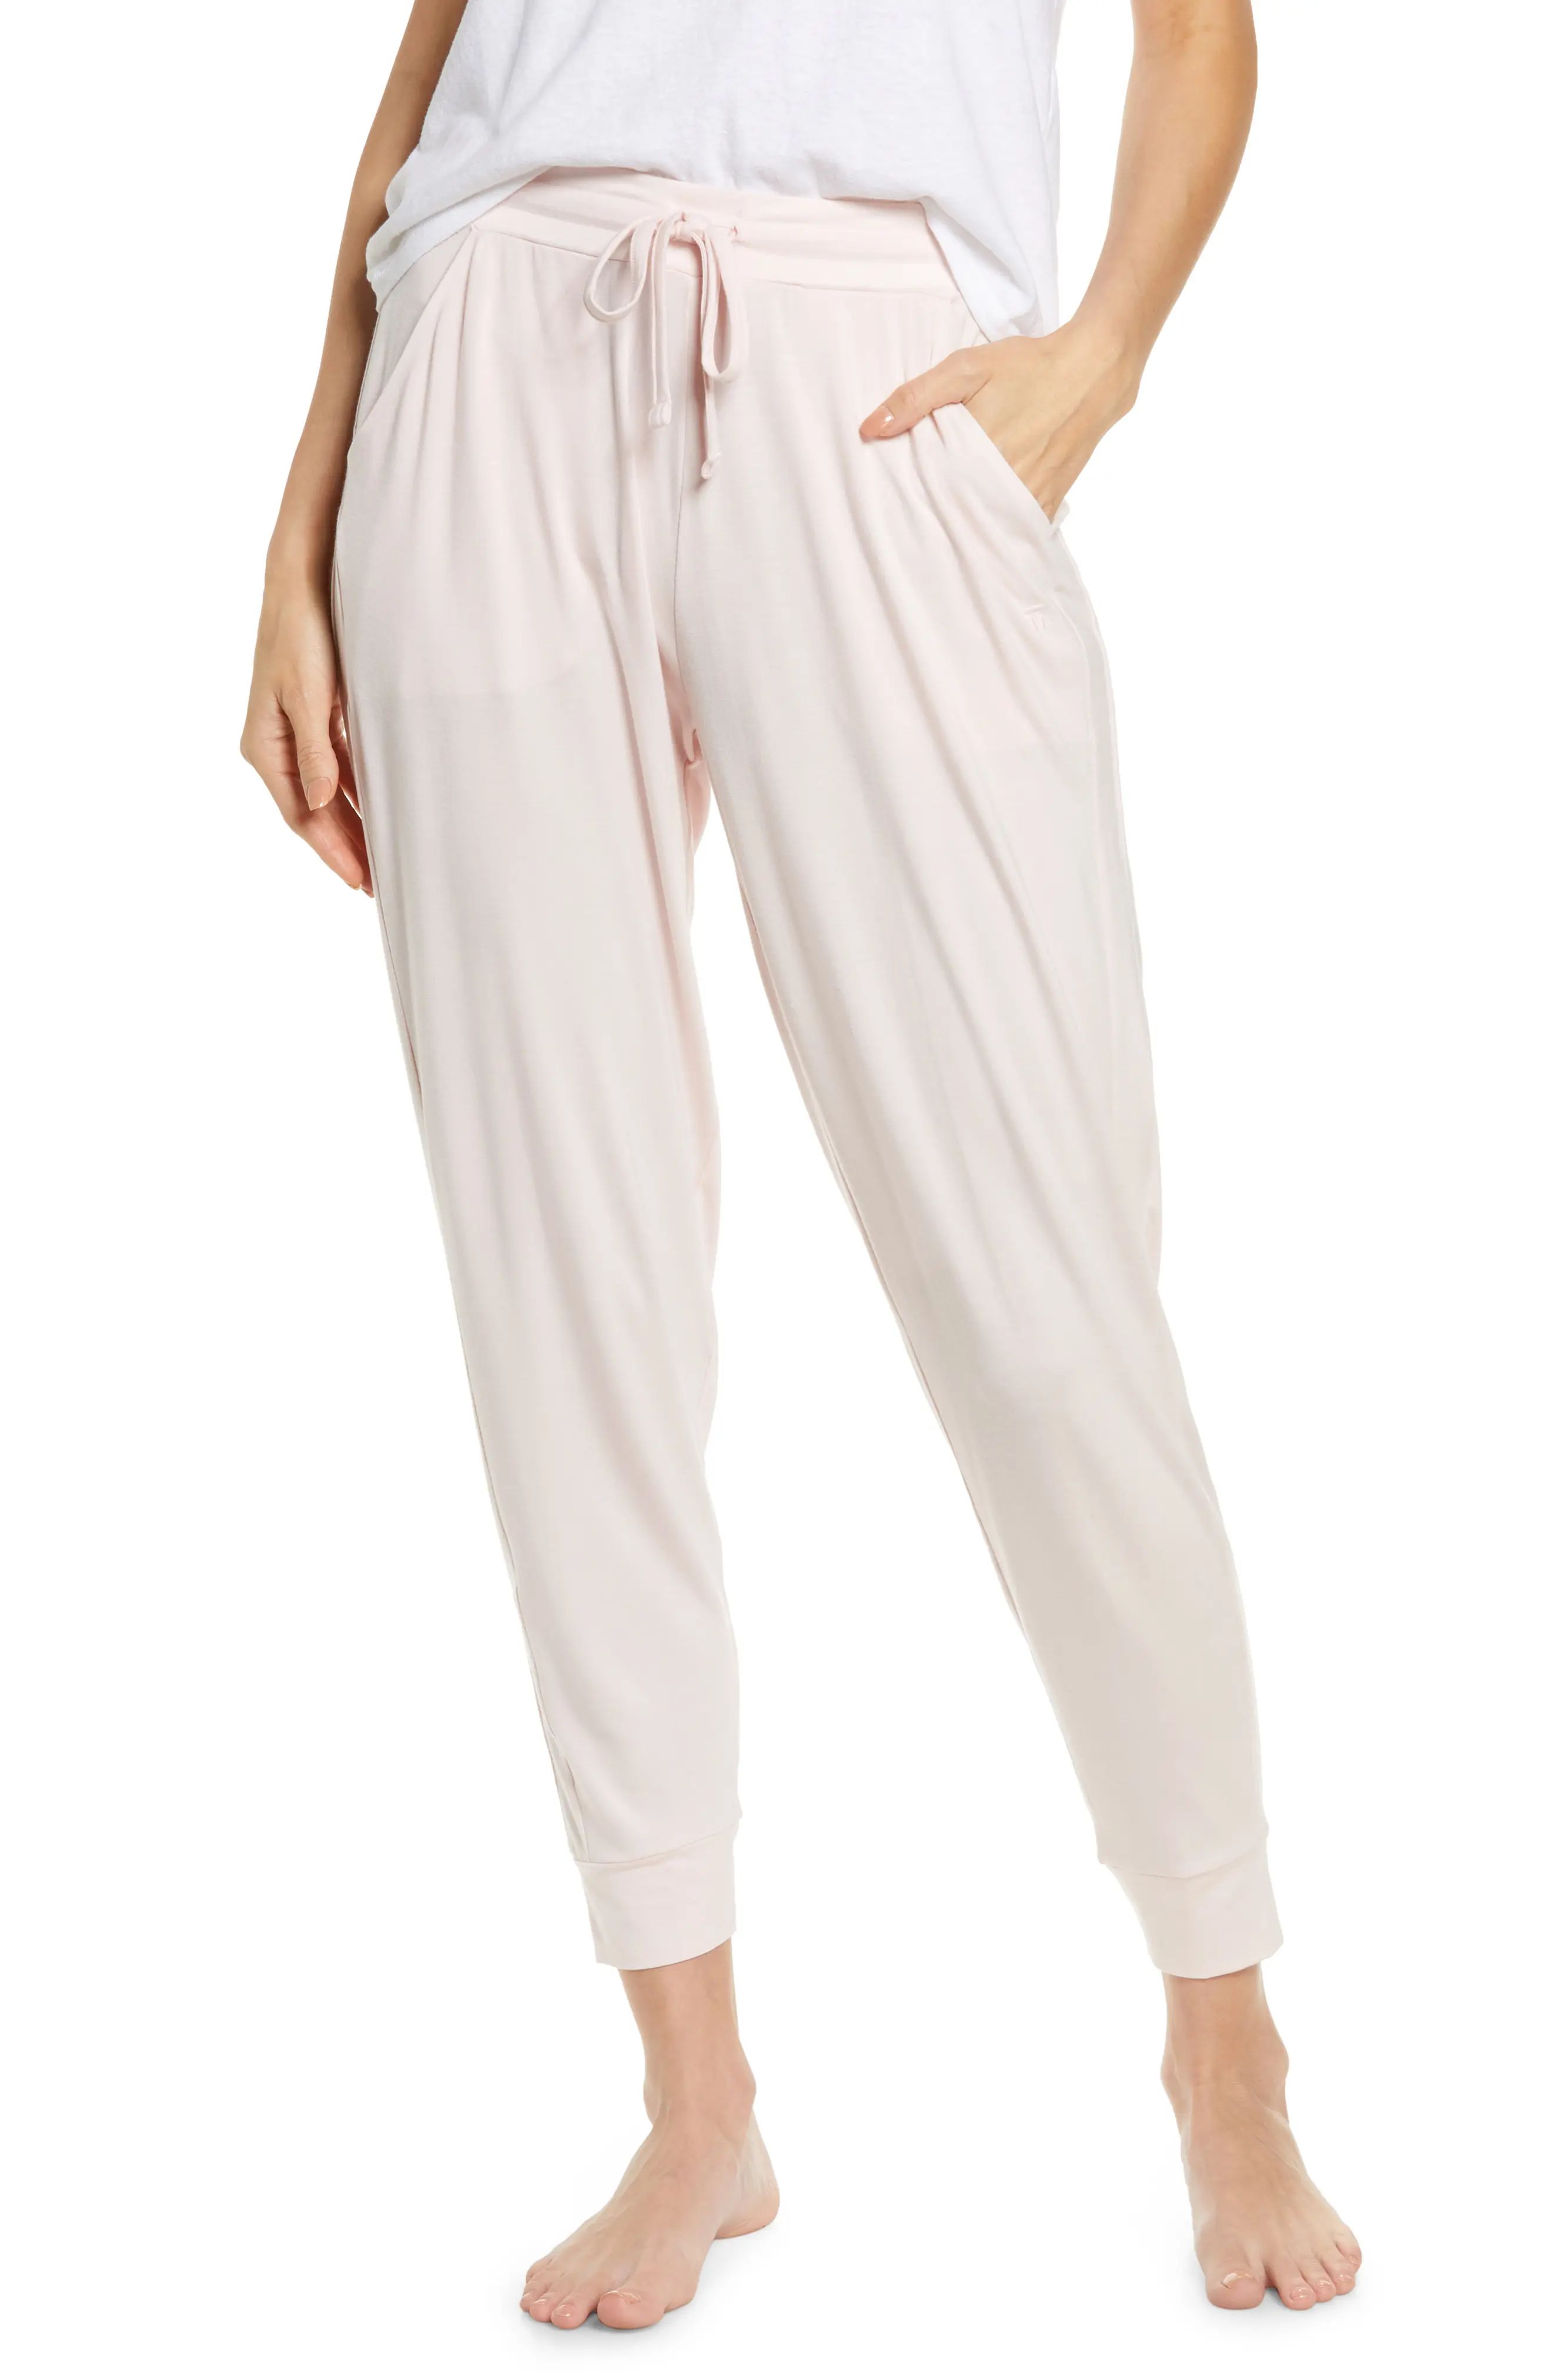 Tommy John Jogger Pants in Barely There at Nordstrom, Size X-Large | Nordstrom